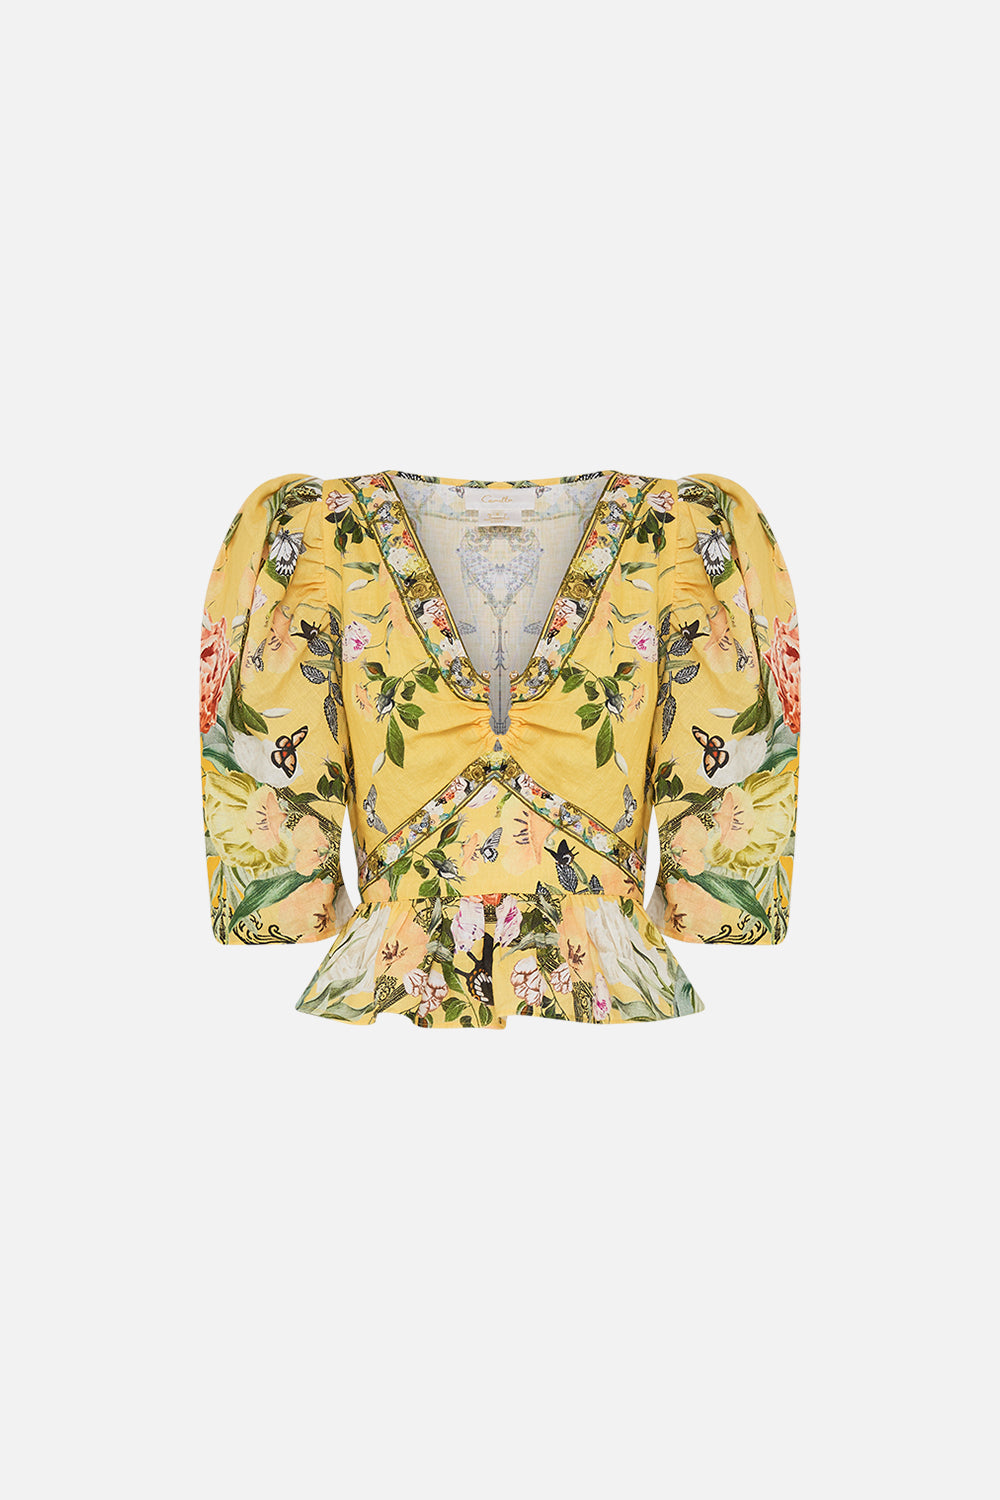 CAMILLA  yellow puff sleeve top in paths Of Gold print